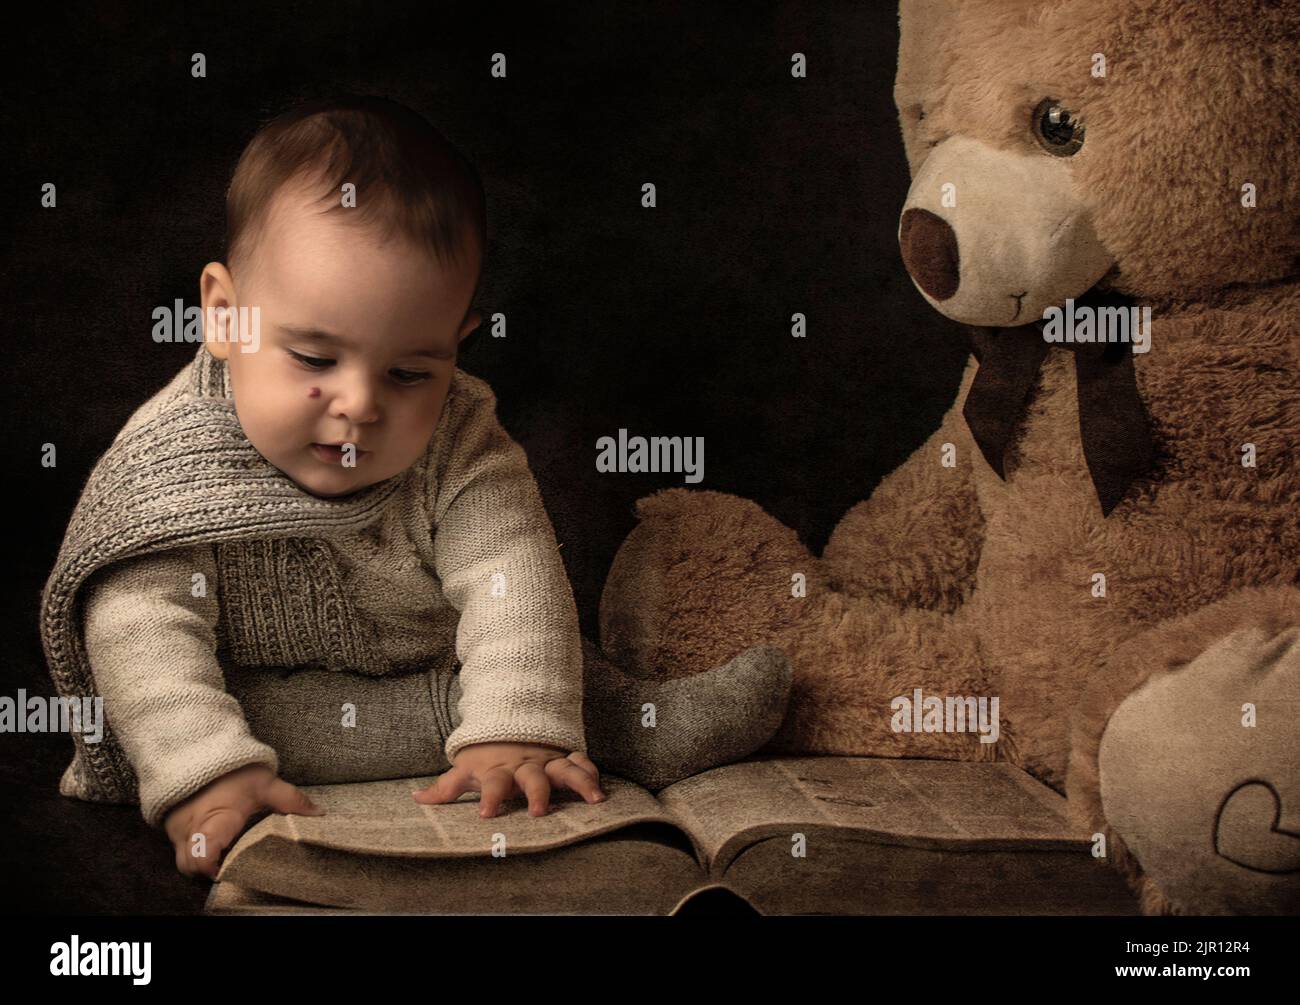 seven months old baby wearing a scraf reading to teddy bear. Dreammy book imagery Stock Photo